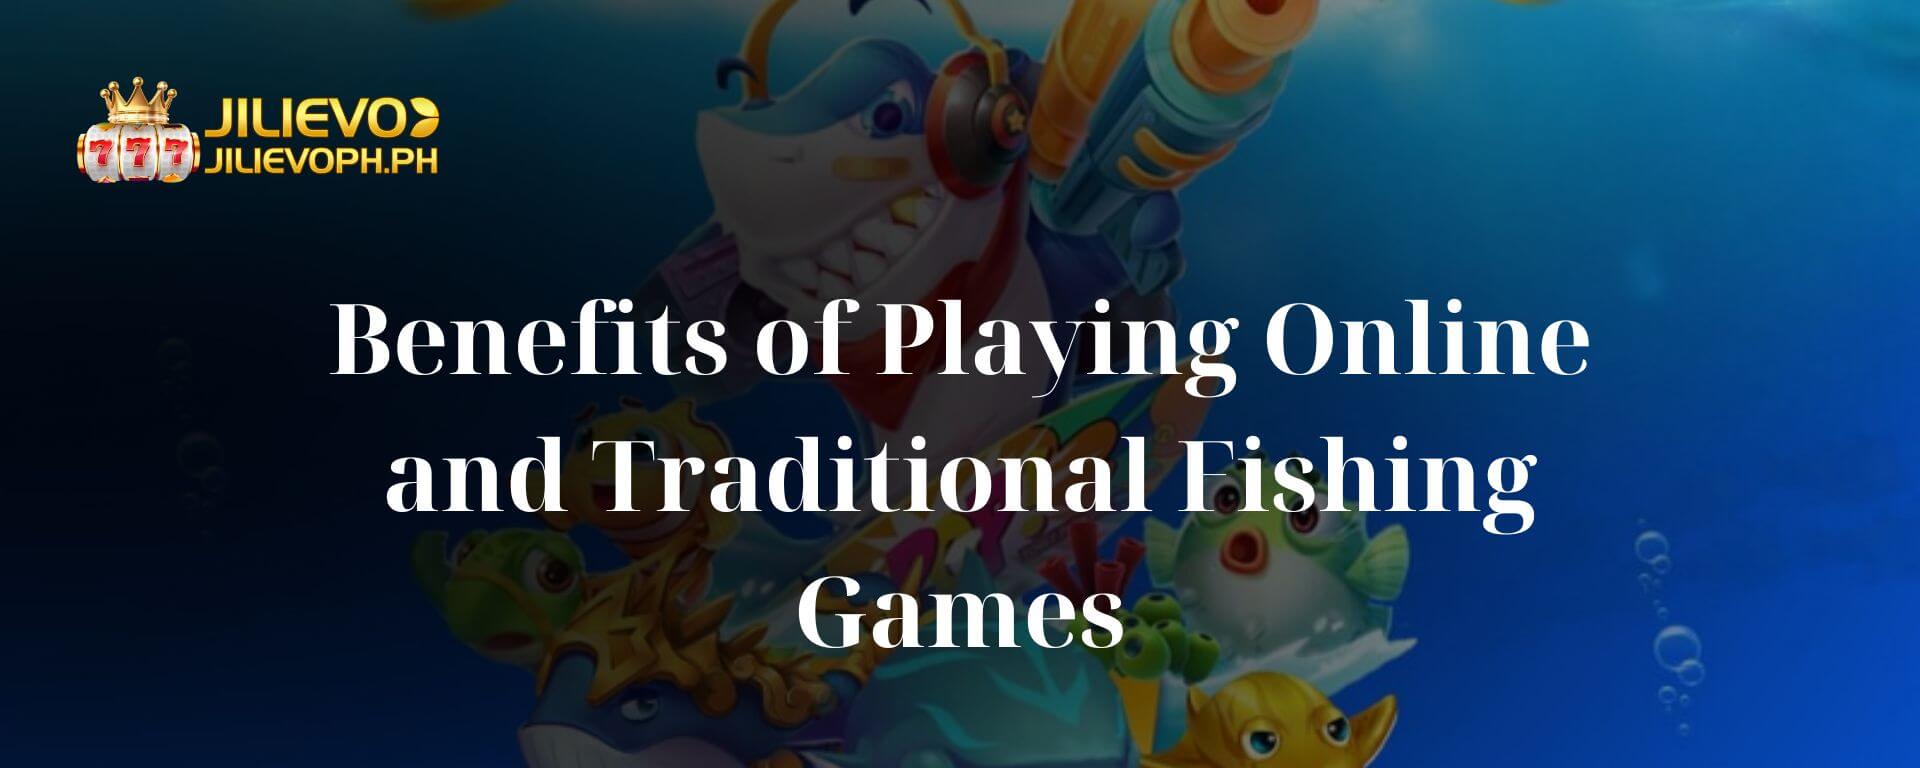 Benefits of Playing Online and Traditional Fishing Games